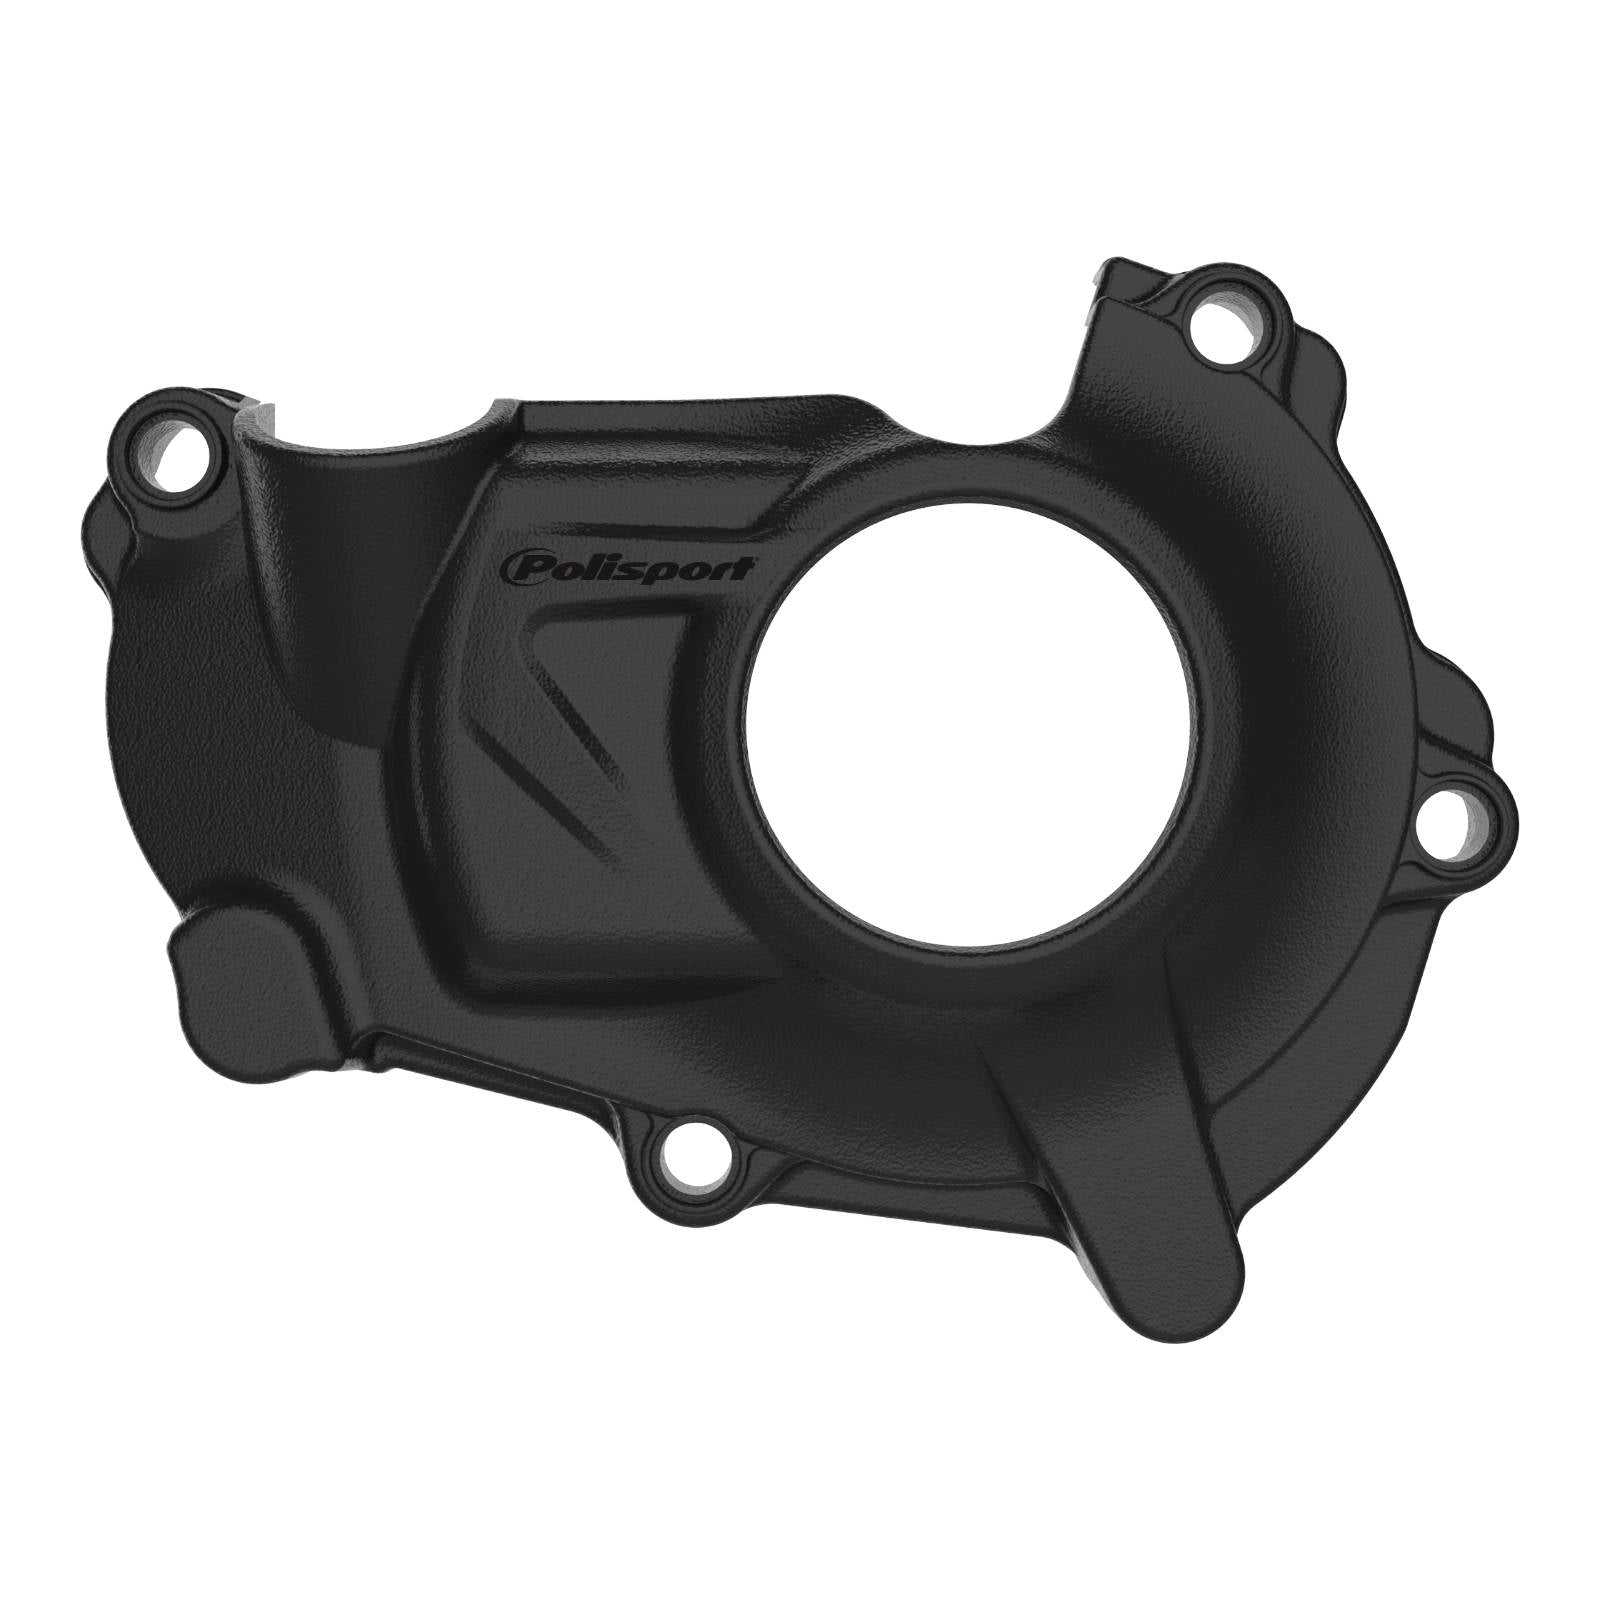 POLISPORT, IGNITION COVER PROTECTOR YAM YZ450F 18-19 - BLK